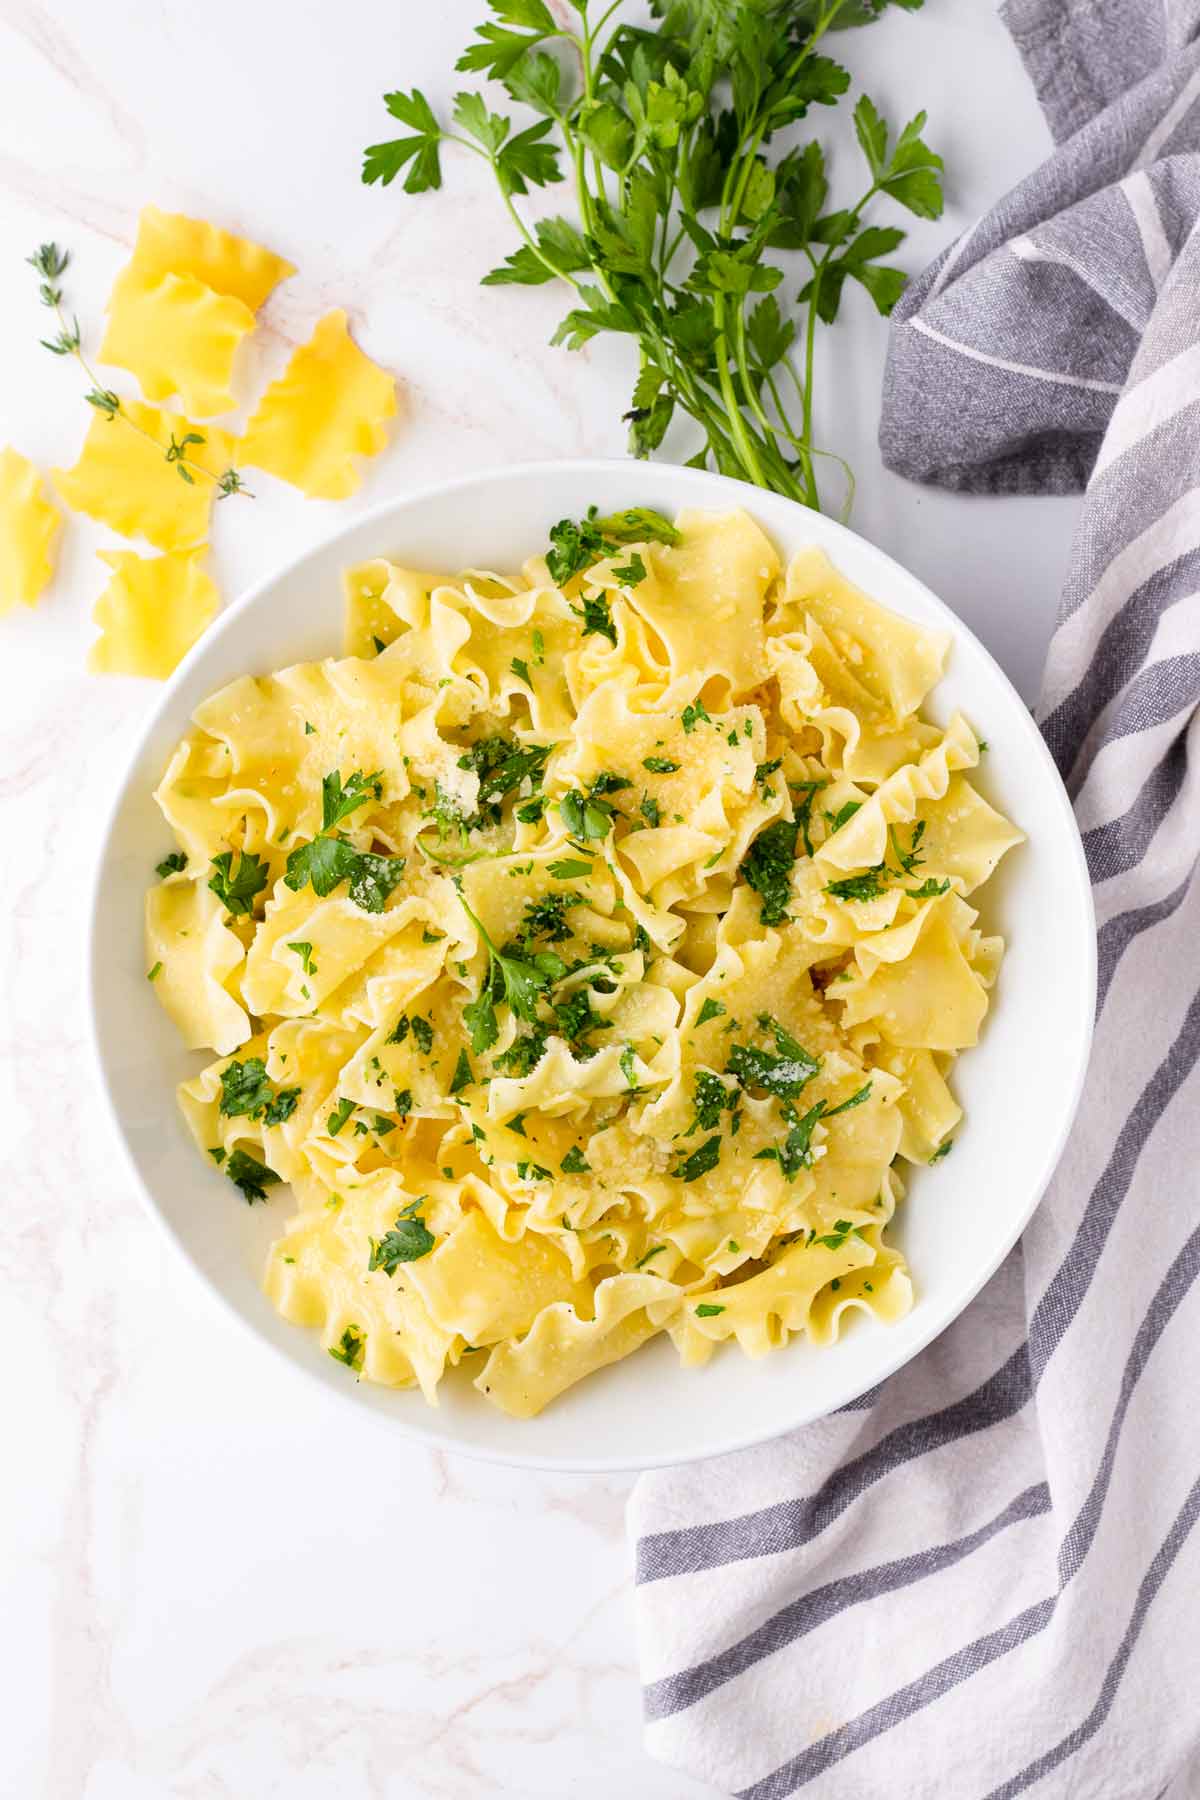 top view of buttered noodles with parsley and parsley in bowl